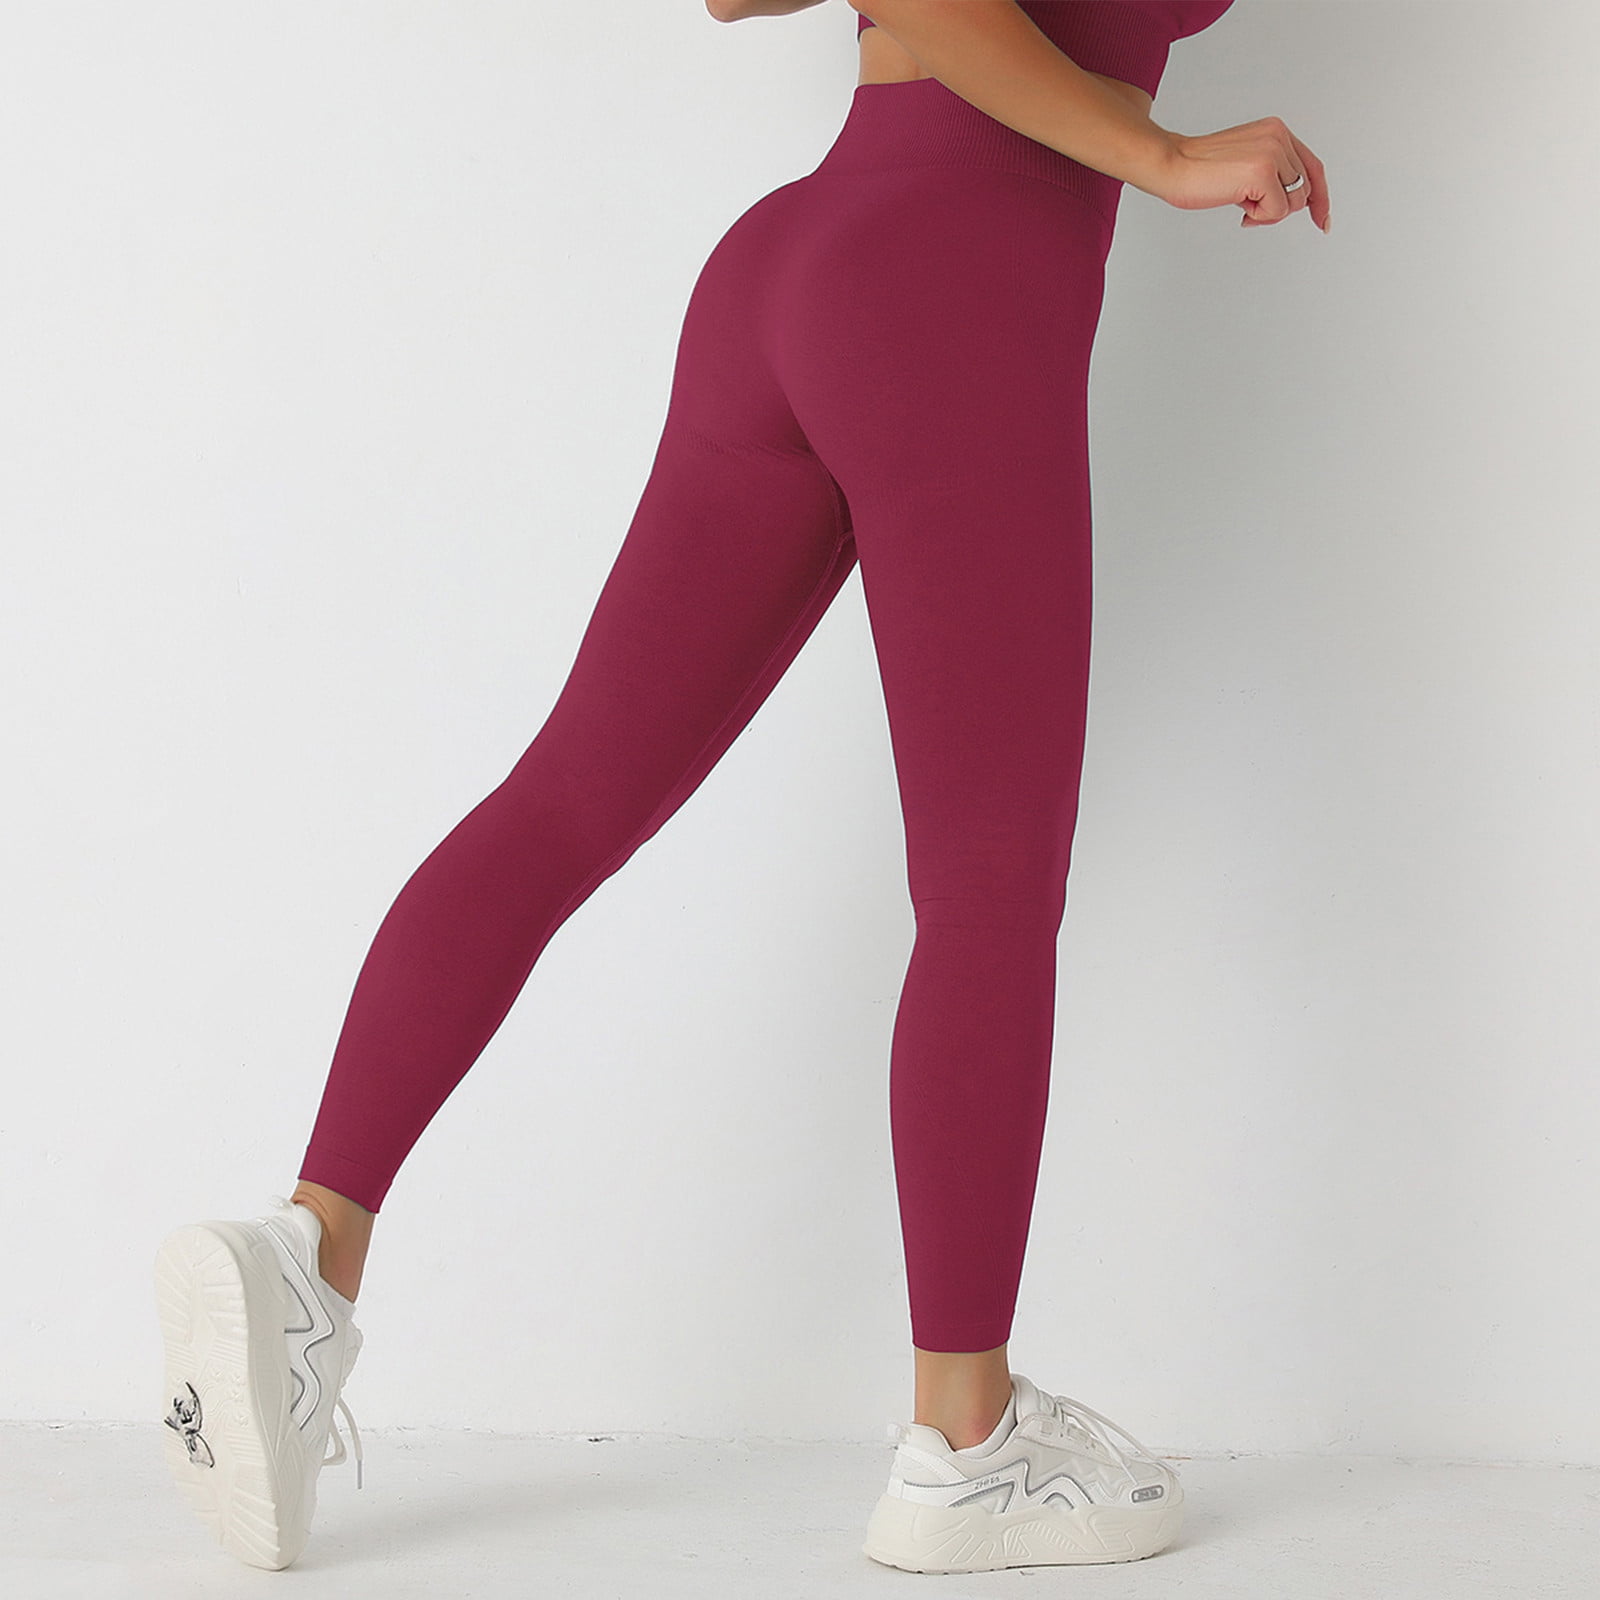 Stocking Stuffers For Her - Under $10 #maroon #leggings #outfit #for #work  #maroonleggingsoutfitforwork A… | Outfits with leggings, Athletic outfits,  Sporty outfits